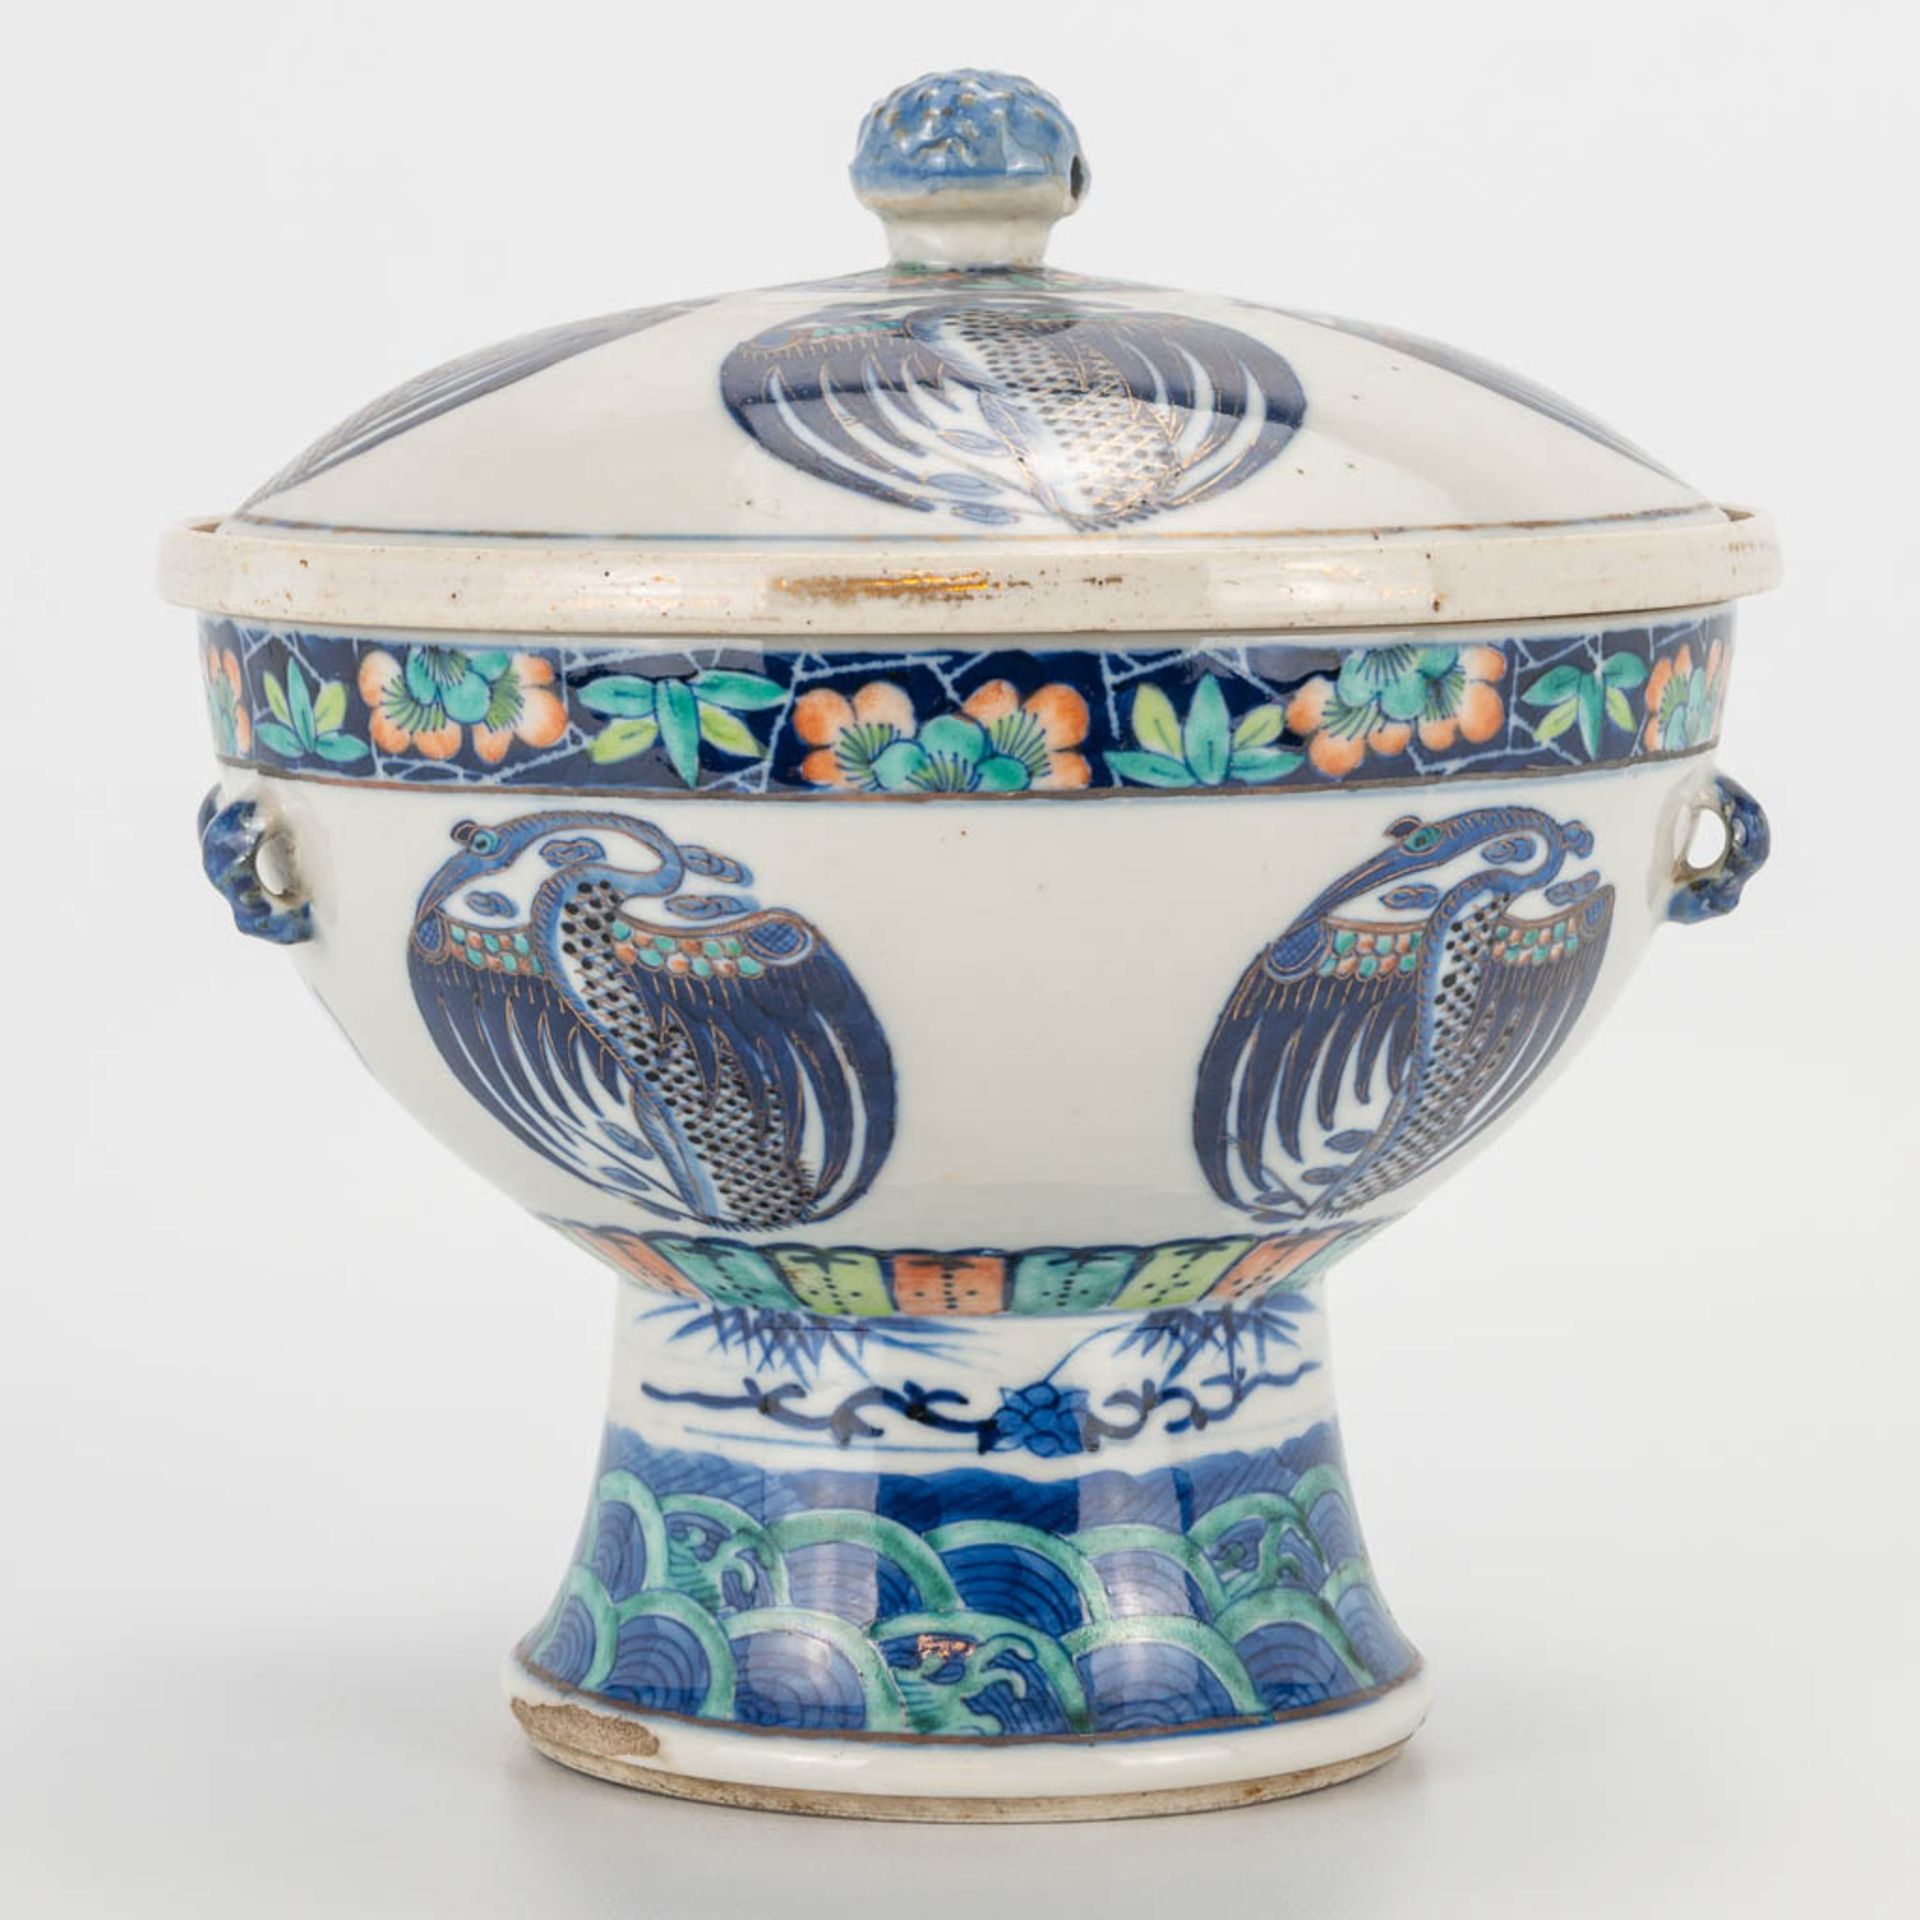 A 'Bain Marie' Douchai made of Chinese porcelain, Tching dinasty, 19th century.Ê (21 x 20 cm) - Image 10 of 16